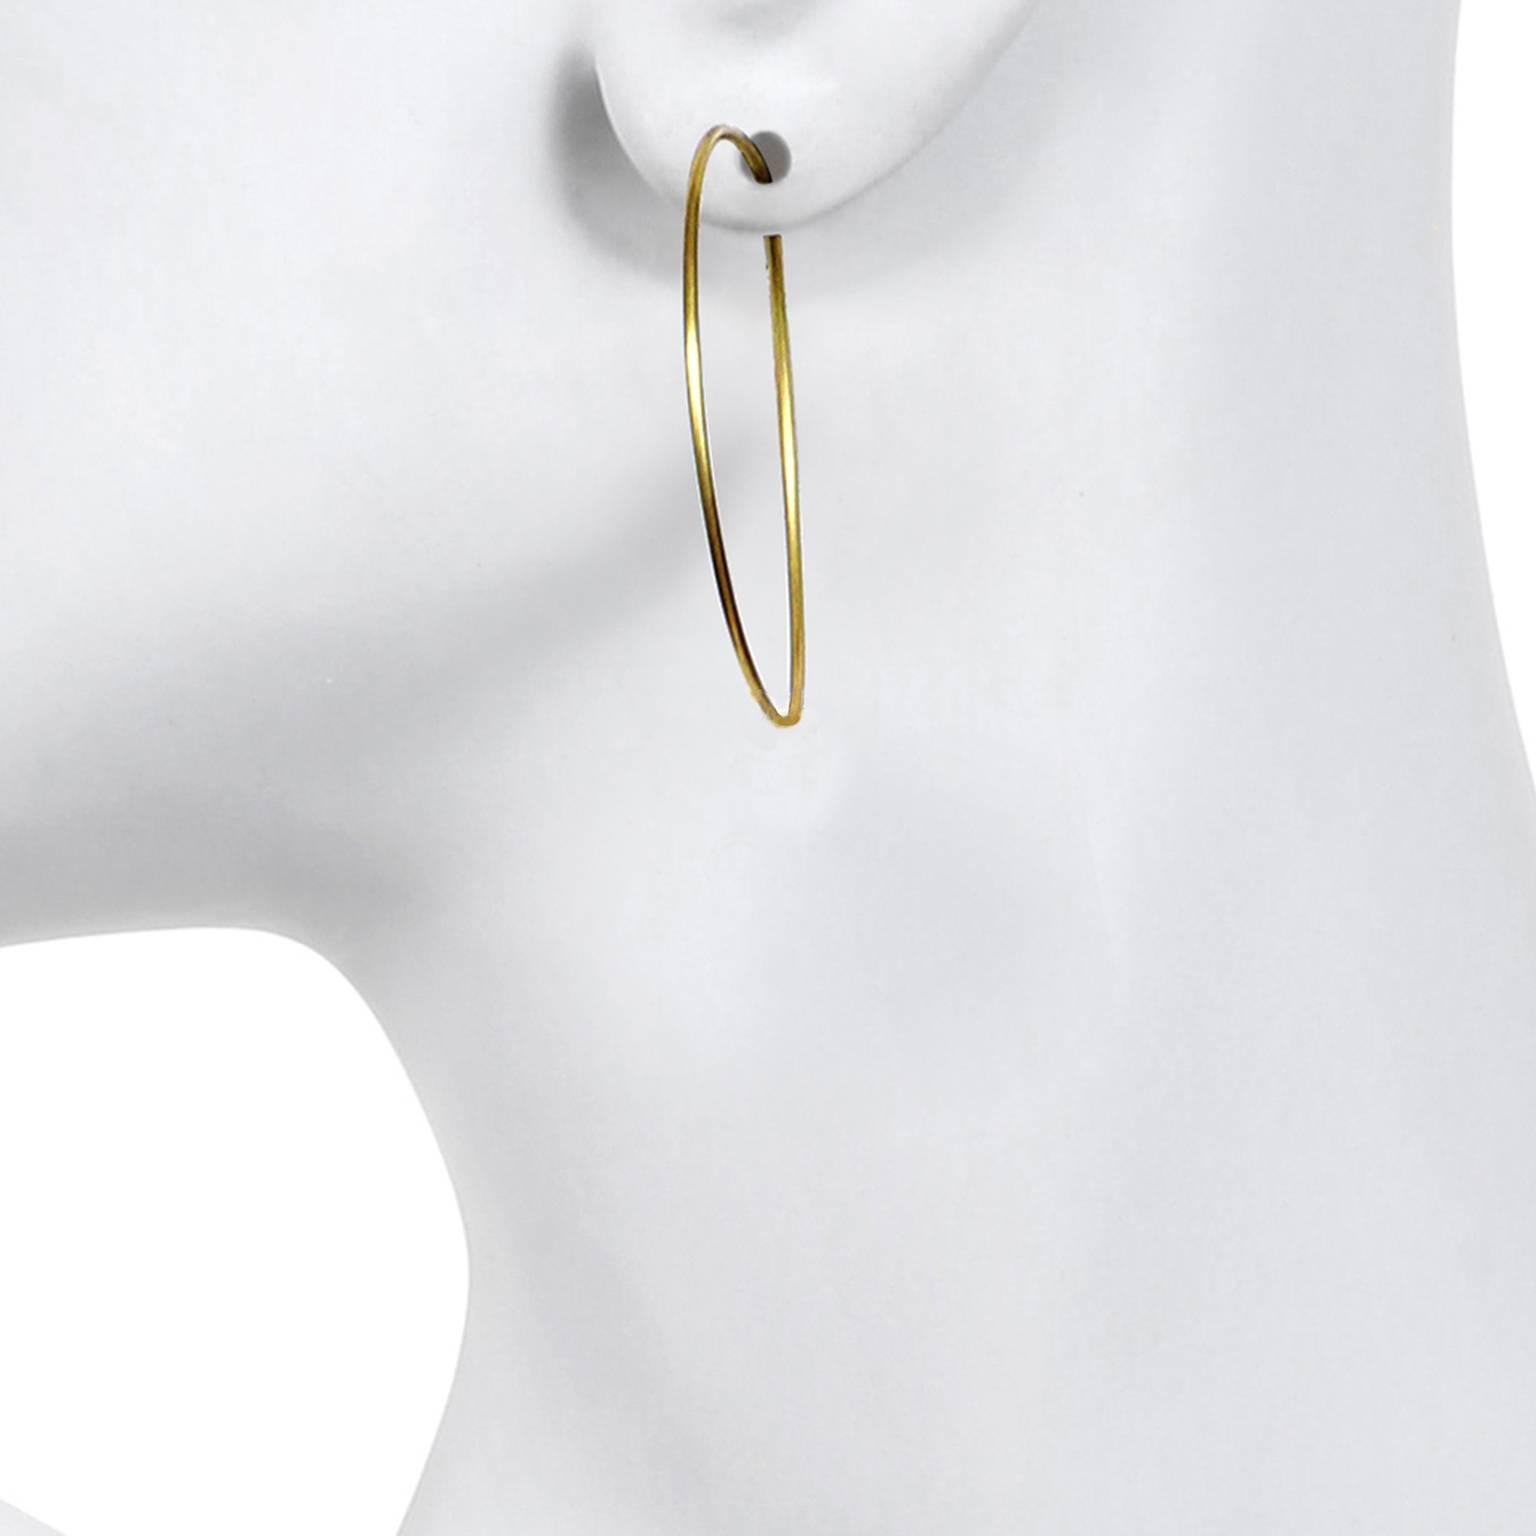 Our most popular hoops handmade in 18 Karat Gold are a must in your jewelry collection. Looks great worn alone as your go-to hoops or with added diamond drops for extra sparkle! Hoop diameter is 1.25 inch. Detachable triple bead diamond drops,